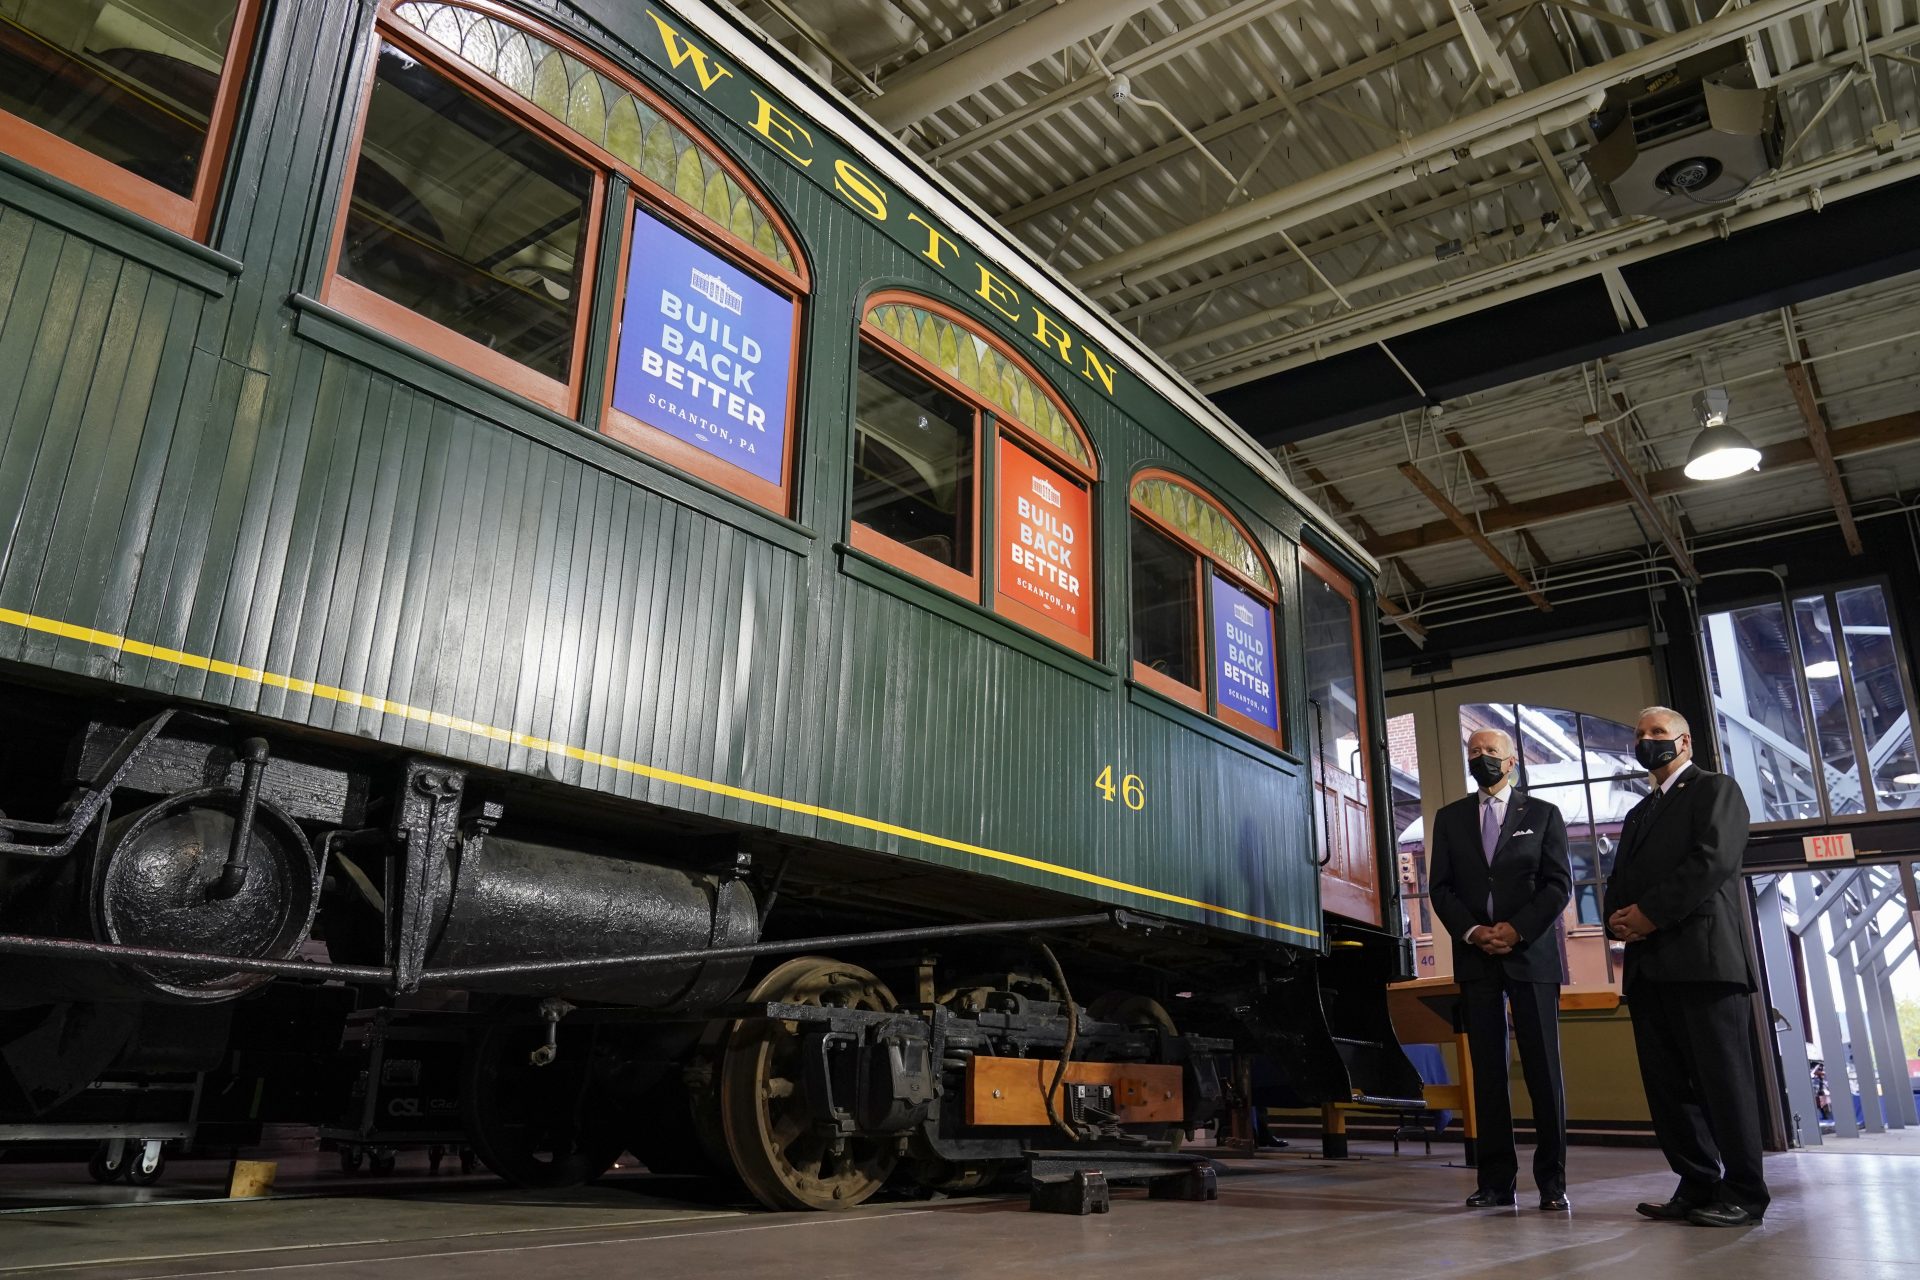 President Joe Biden tours the Electric City Trolley Museum with Wayne R. Hiller, executive director and manager of the museum, during a visit to his hometown of Scranton, Pa., Wednesday, Oct. 20, 2021